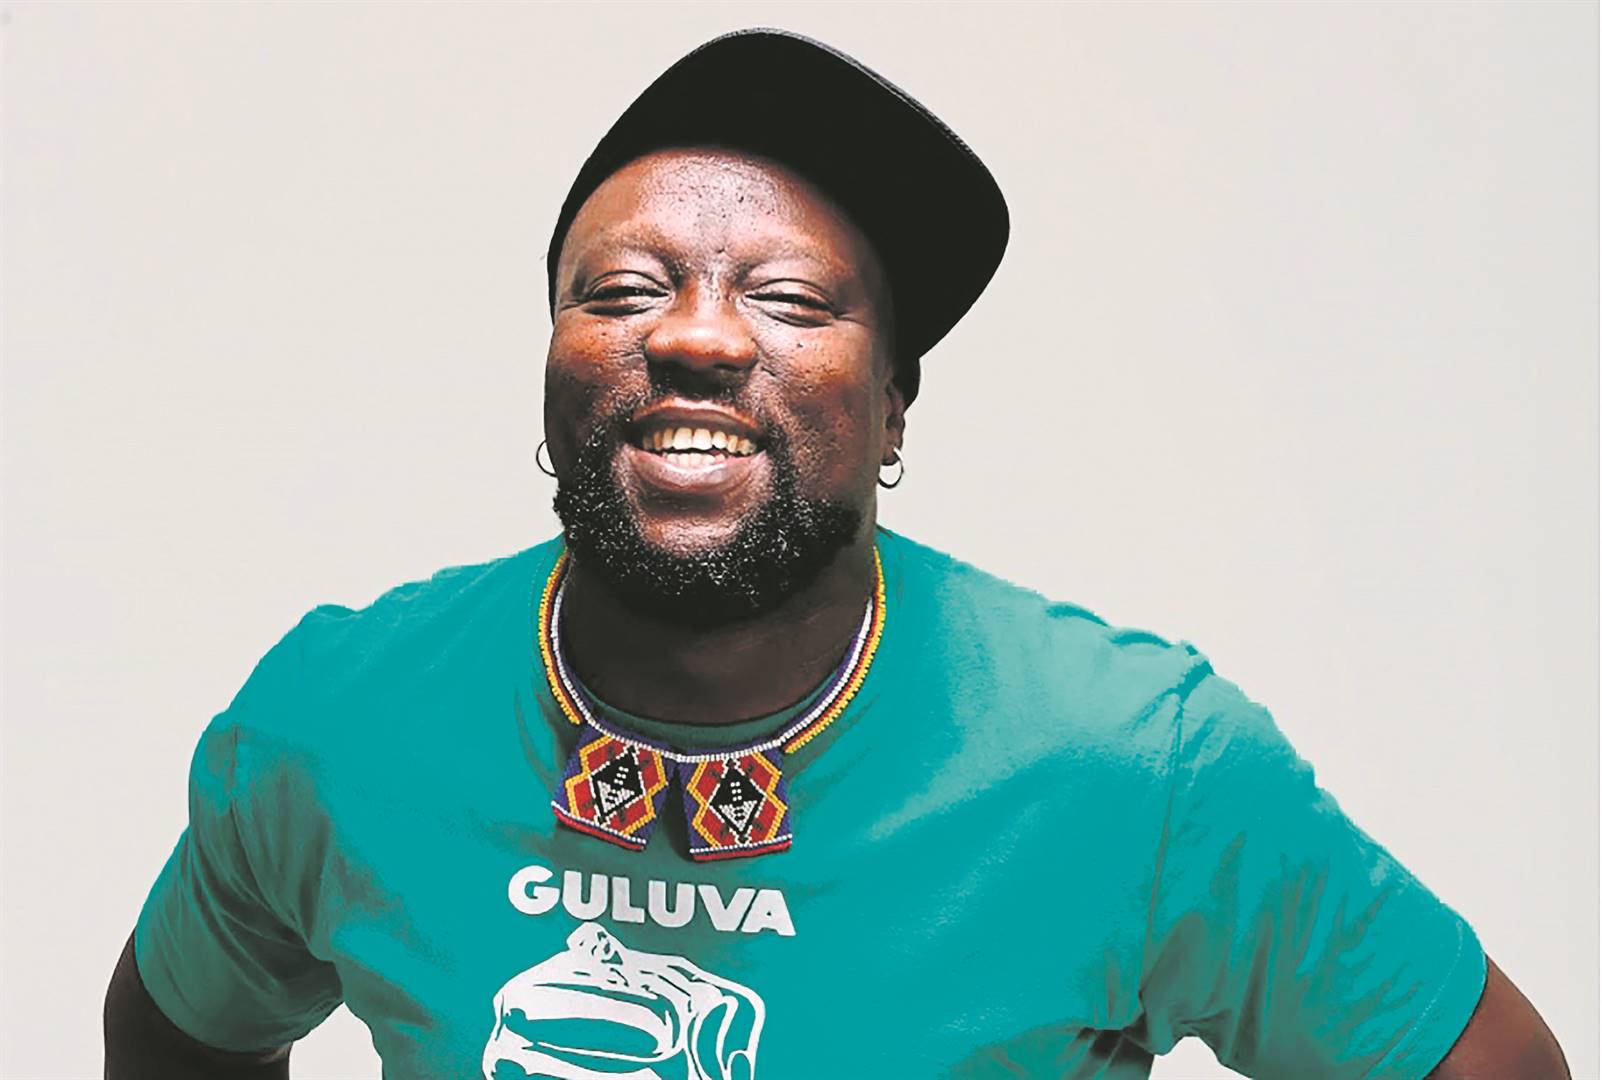 Fake news that Zola 7 died went viral on social media at the weekend. 